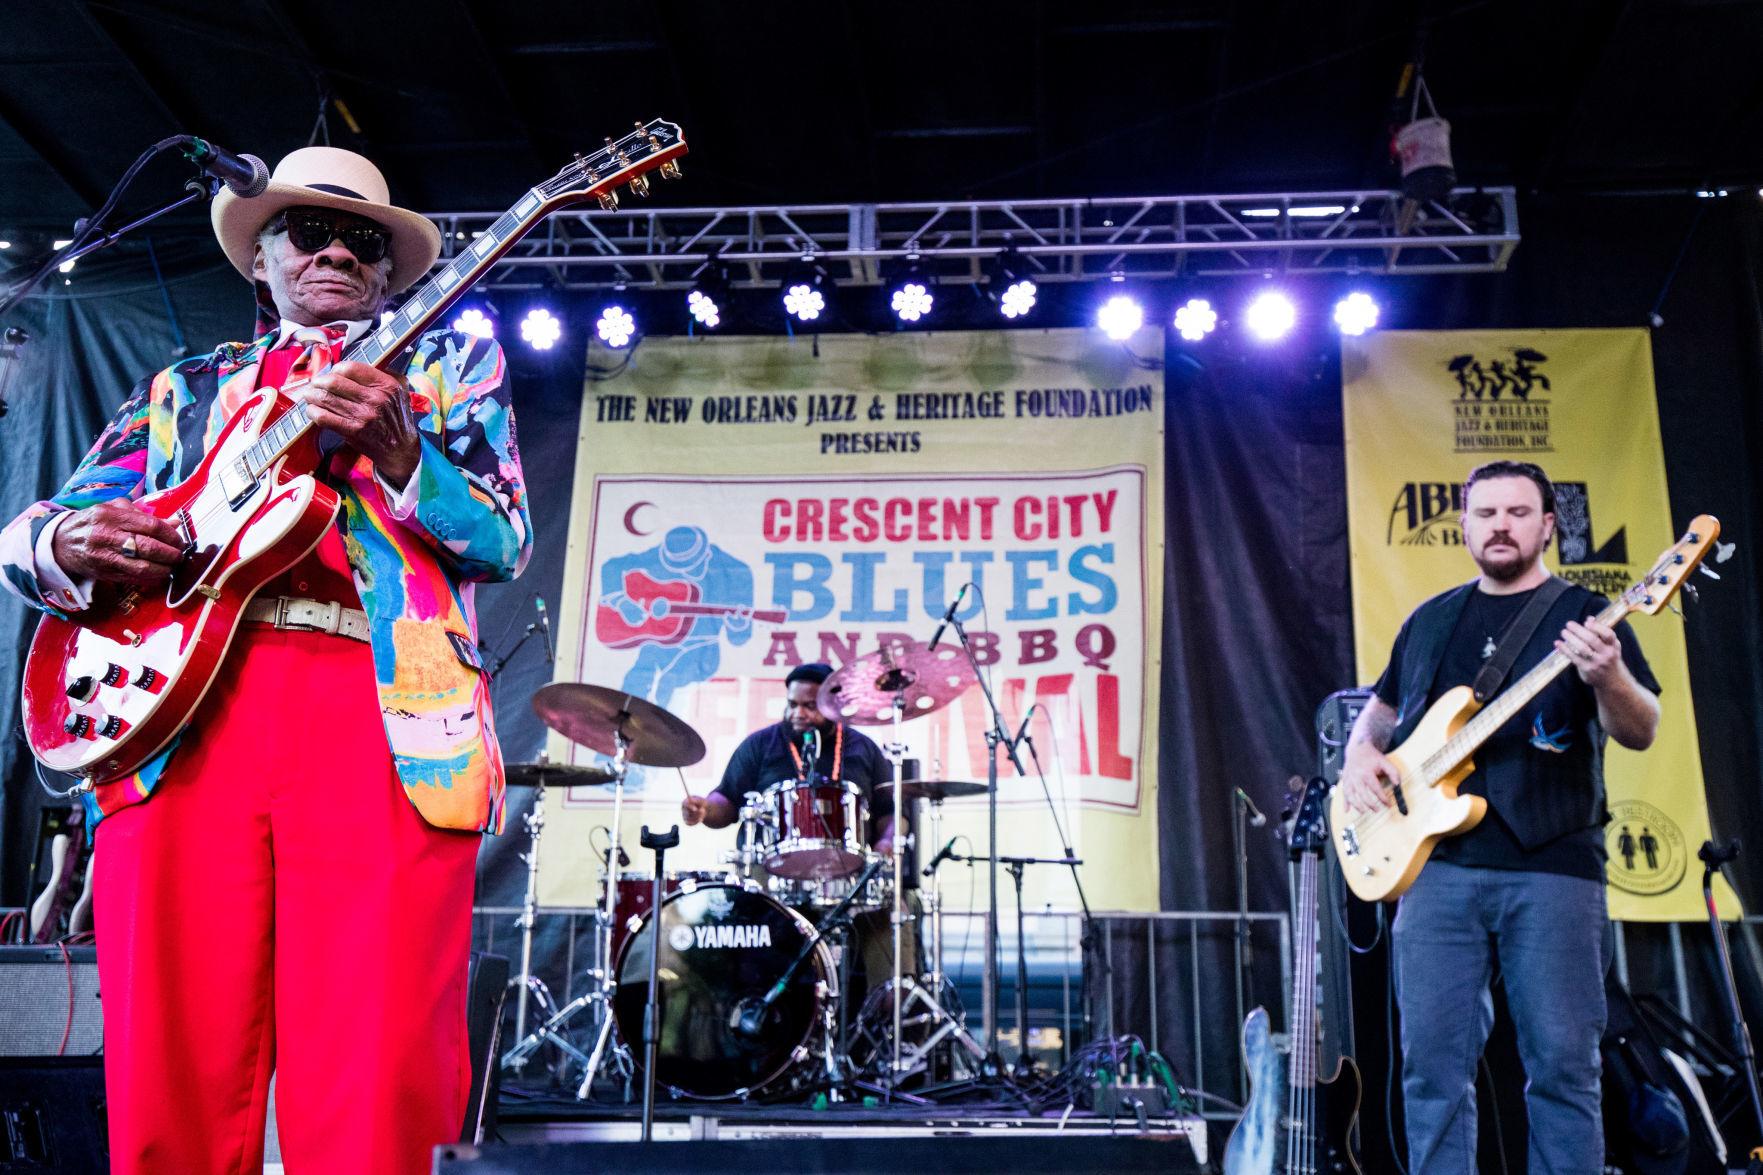 Crescent City Blues and BBQ Festival features Allman Betts Band, lots